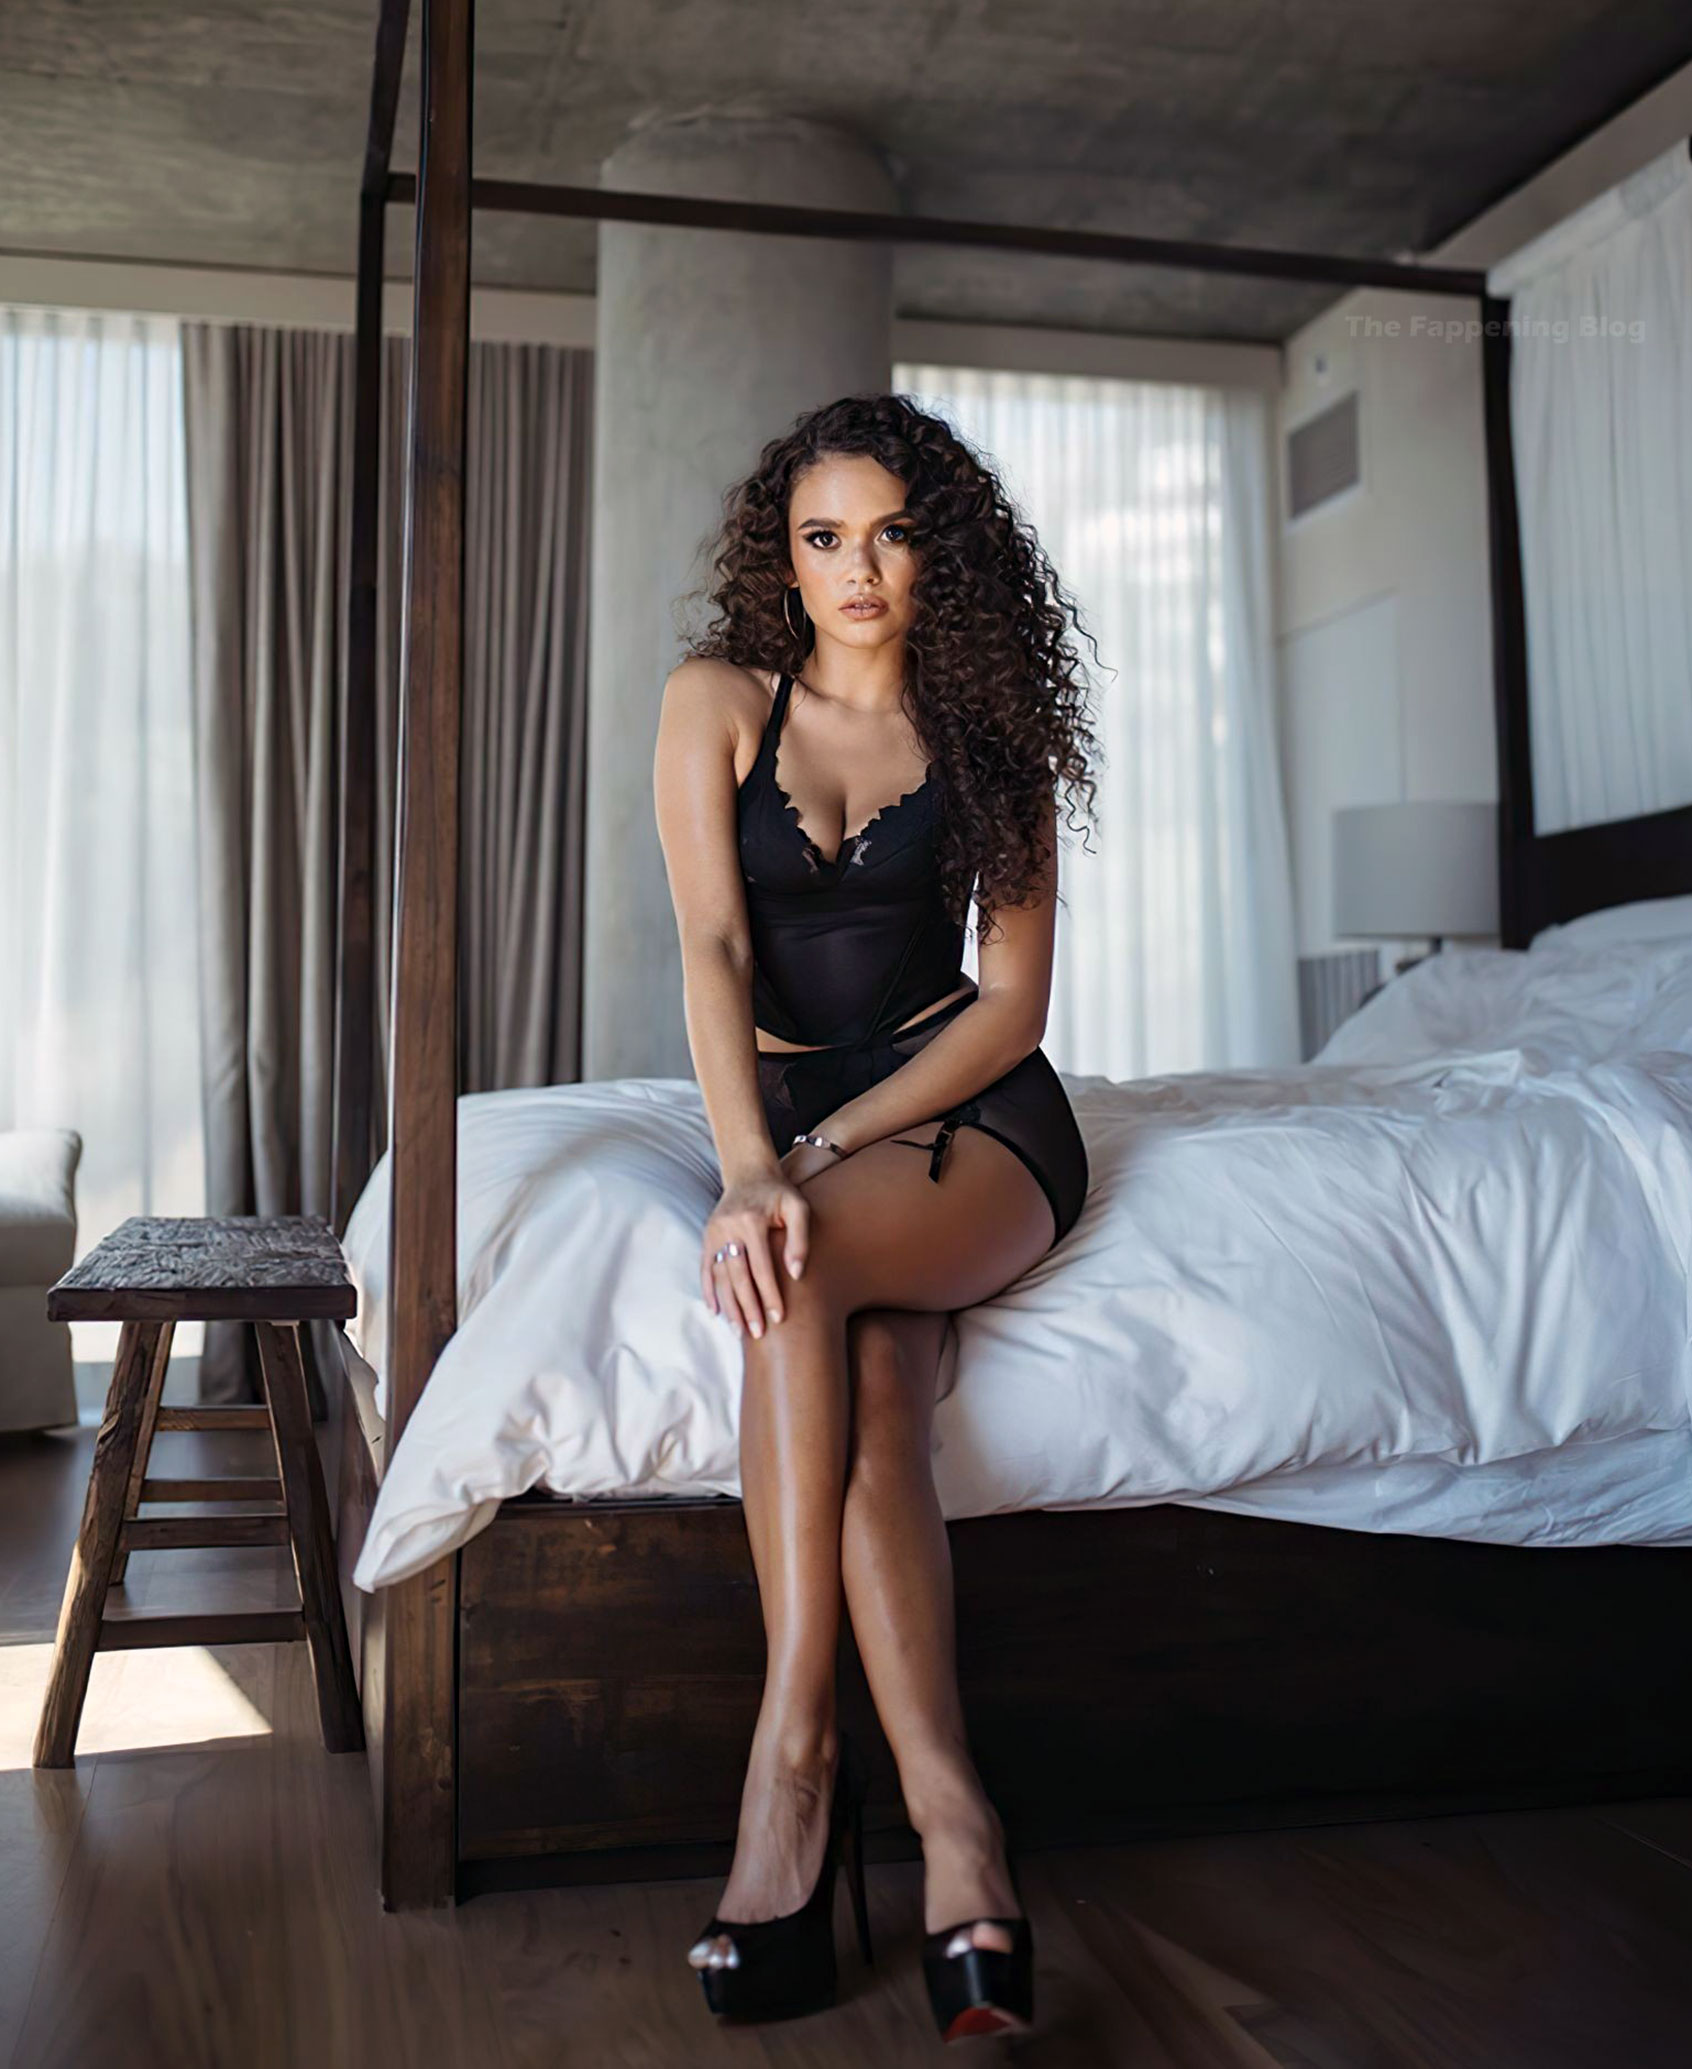 Madison Pettis Nude and Sexy Lingerie Photos.